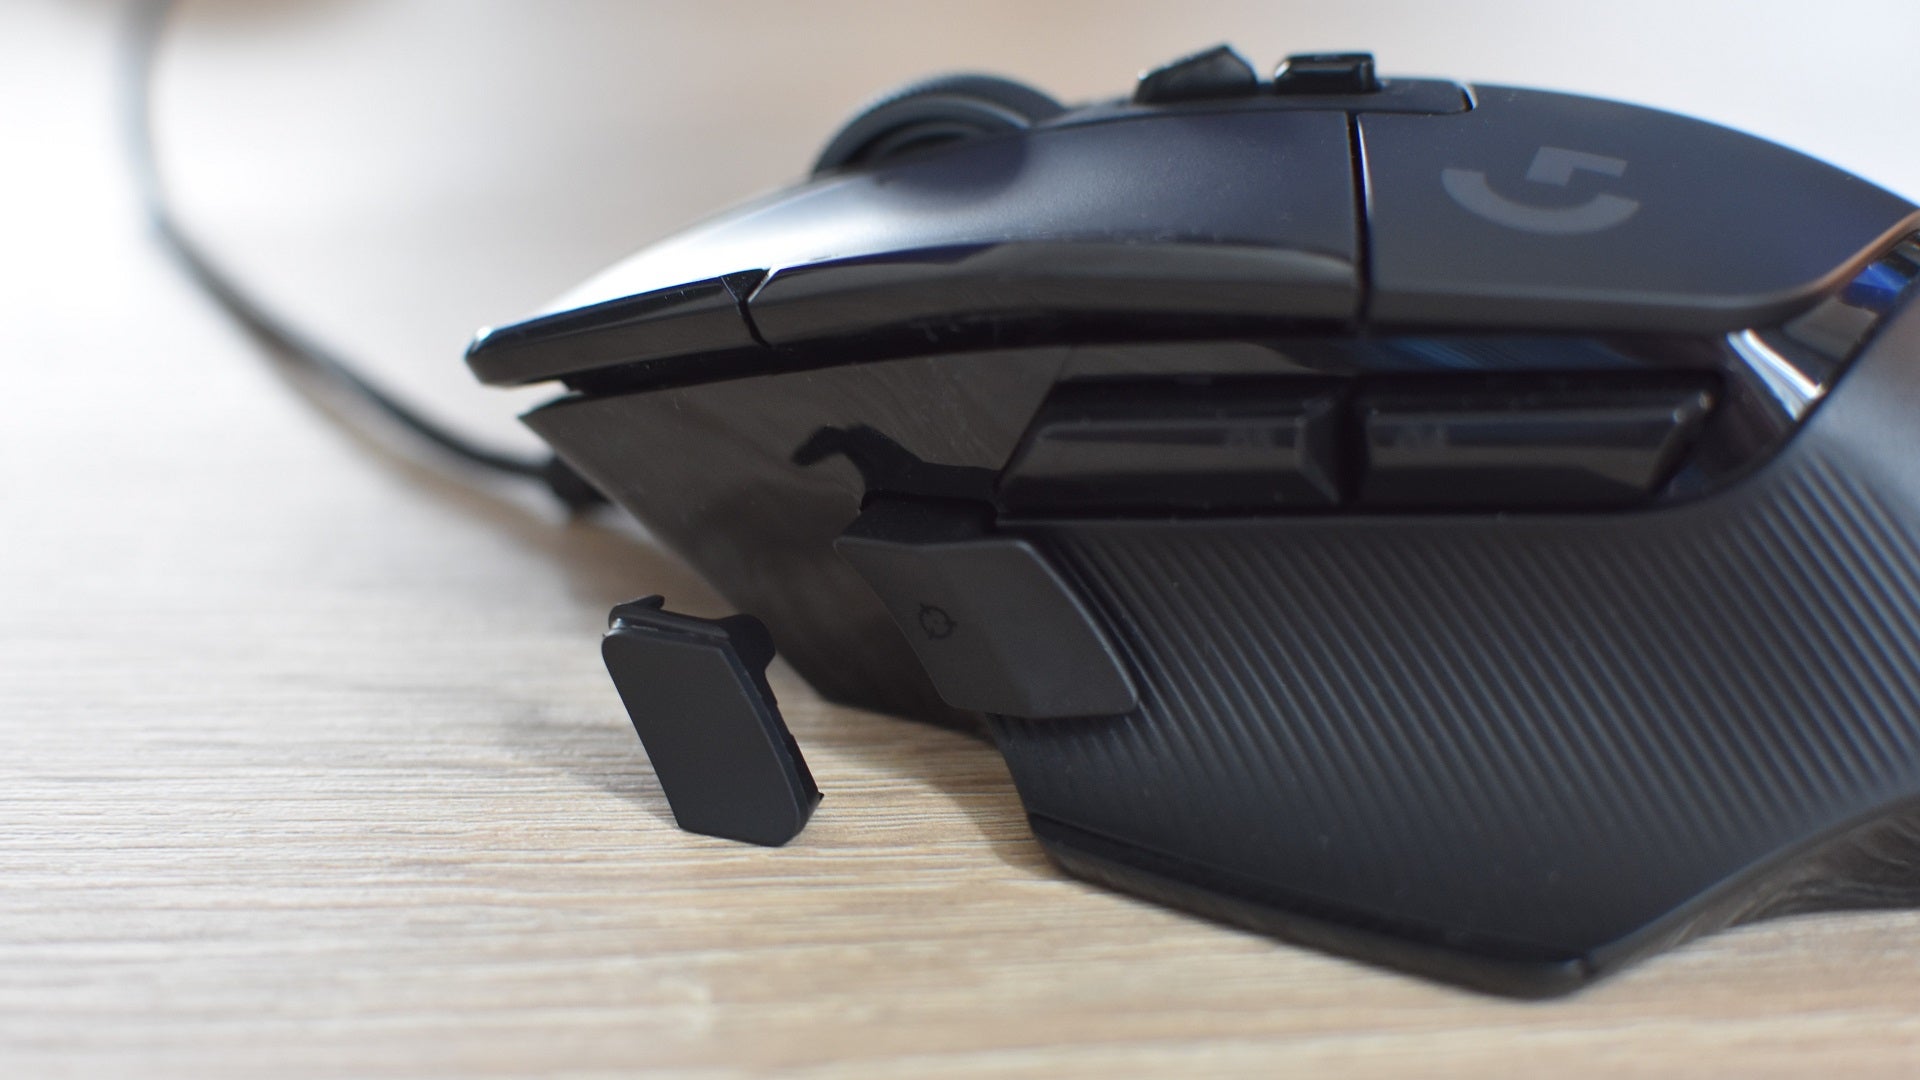 A closeup of the DPI clutch button on the Logitech G502 X gaming mouse, with its plain cover attachment next to it on the desk.